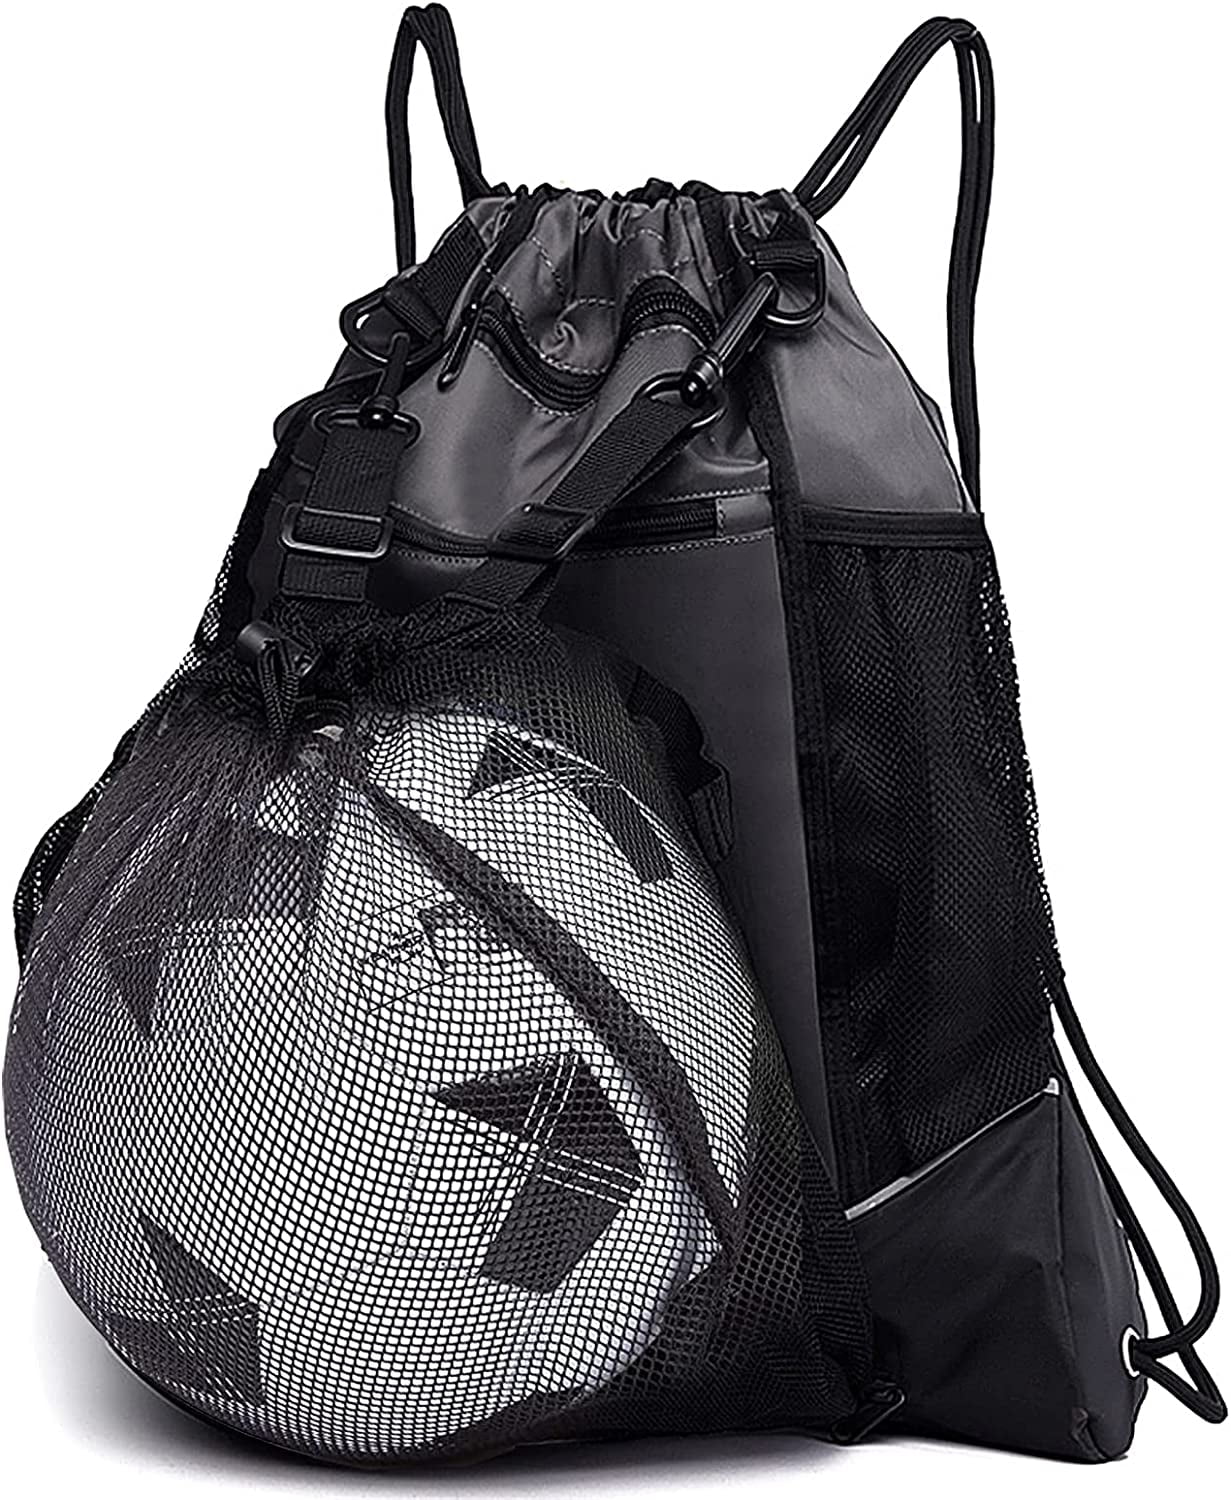 Basketball Backpack with Detachable Ball Mesh Basketball Bag with Compartment Volleyball Foldable Soccer Backpack Gym Bag 